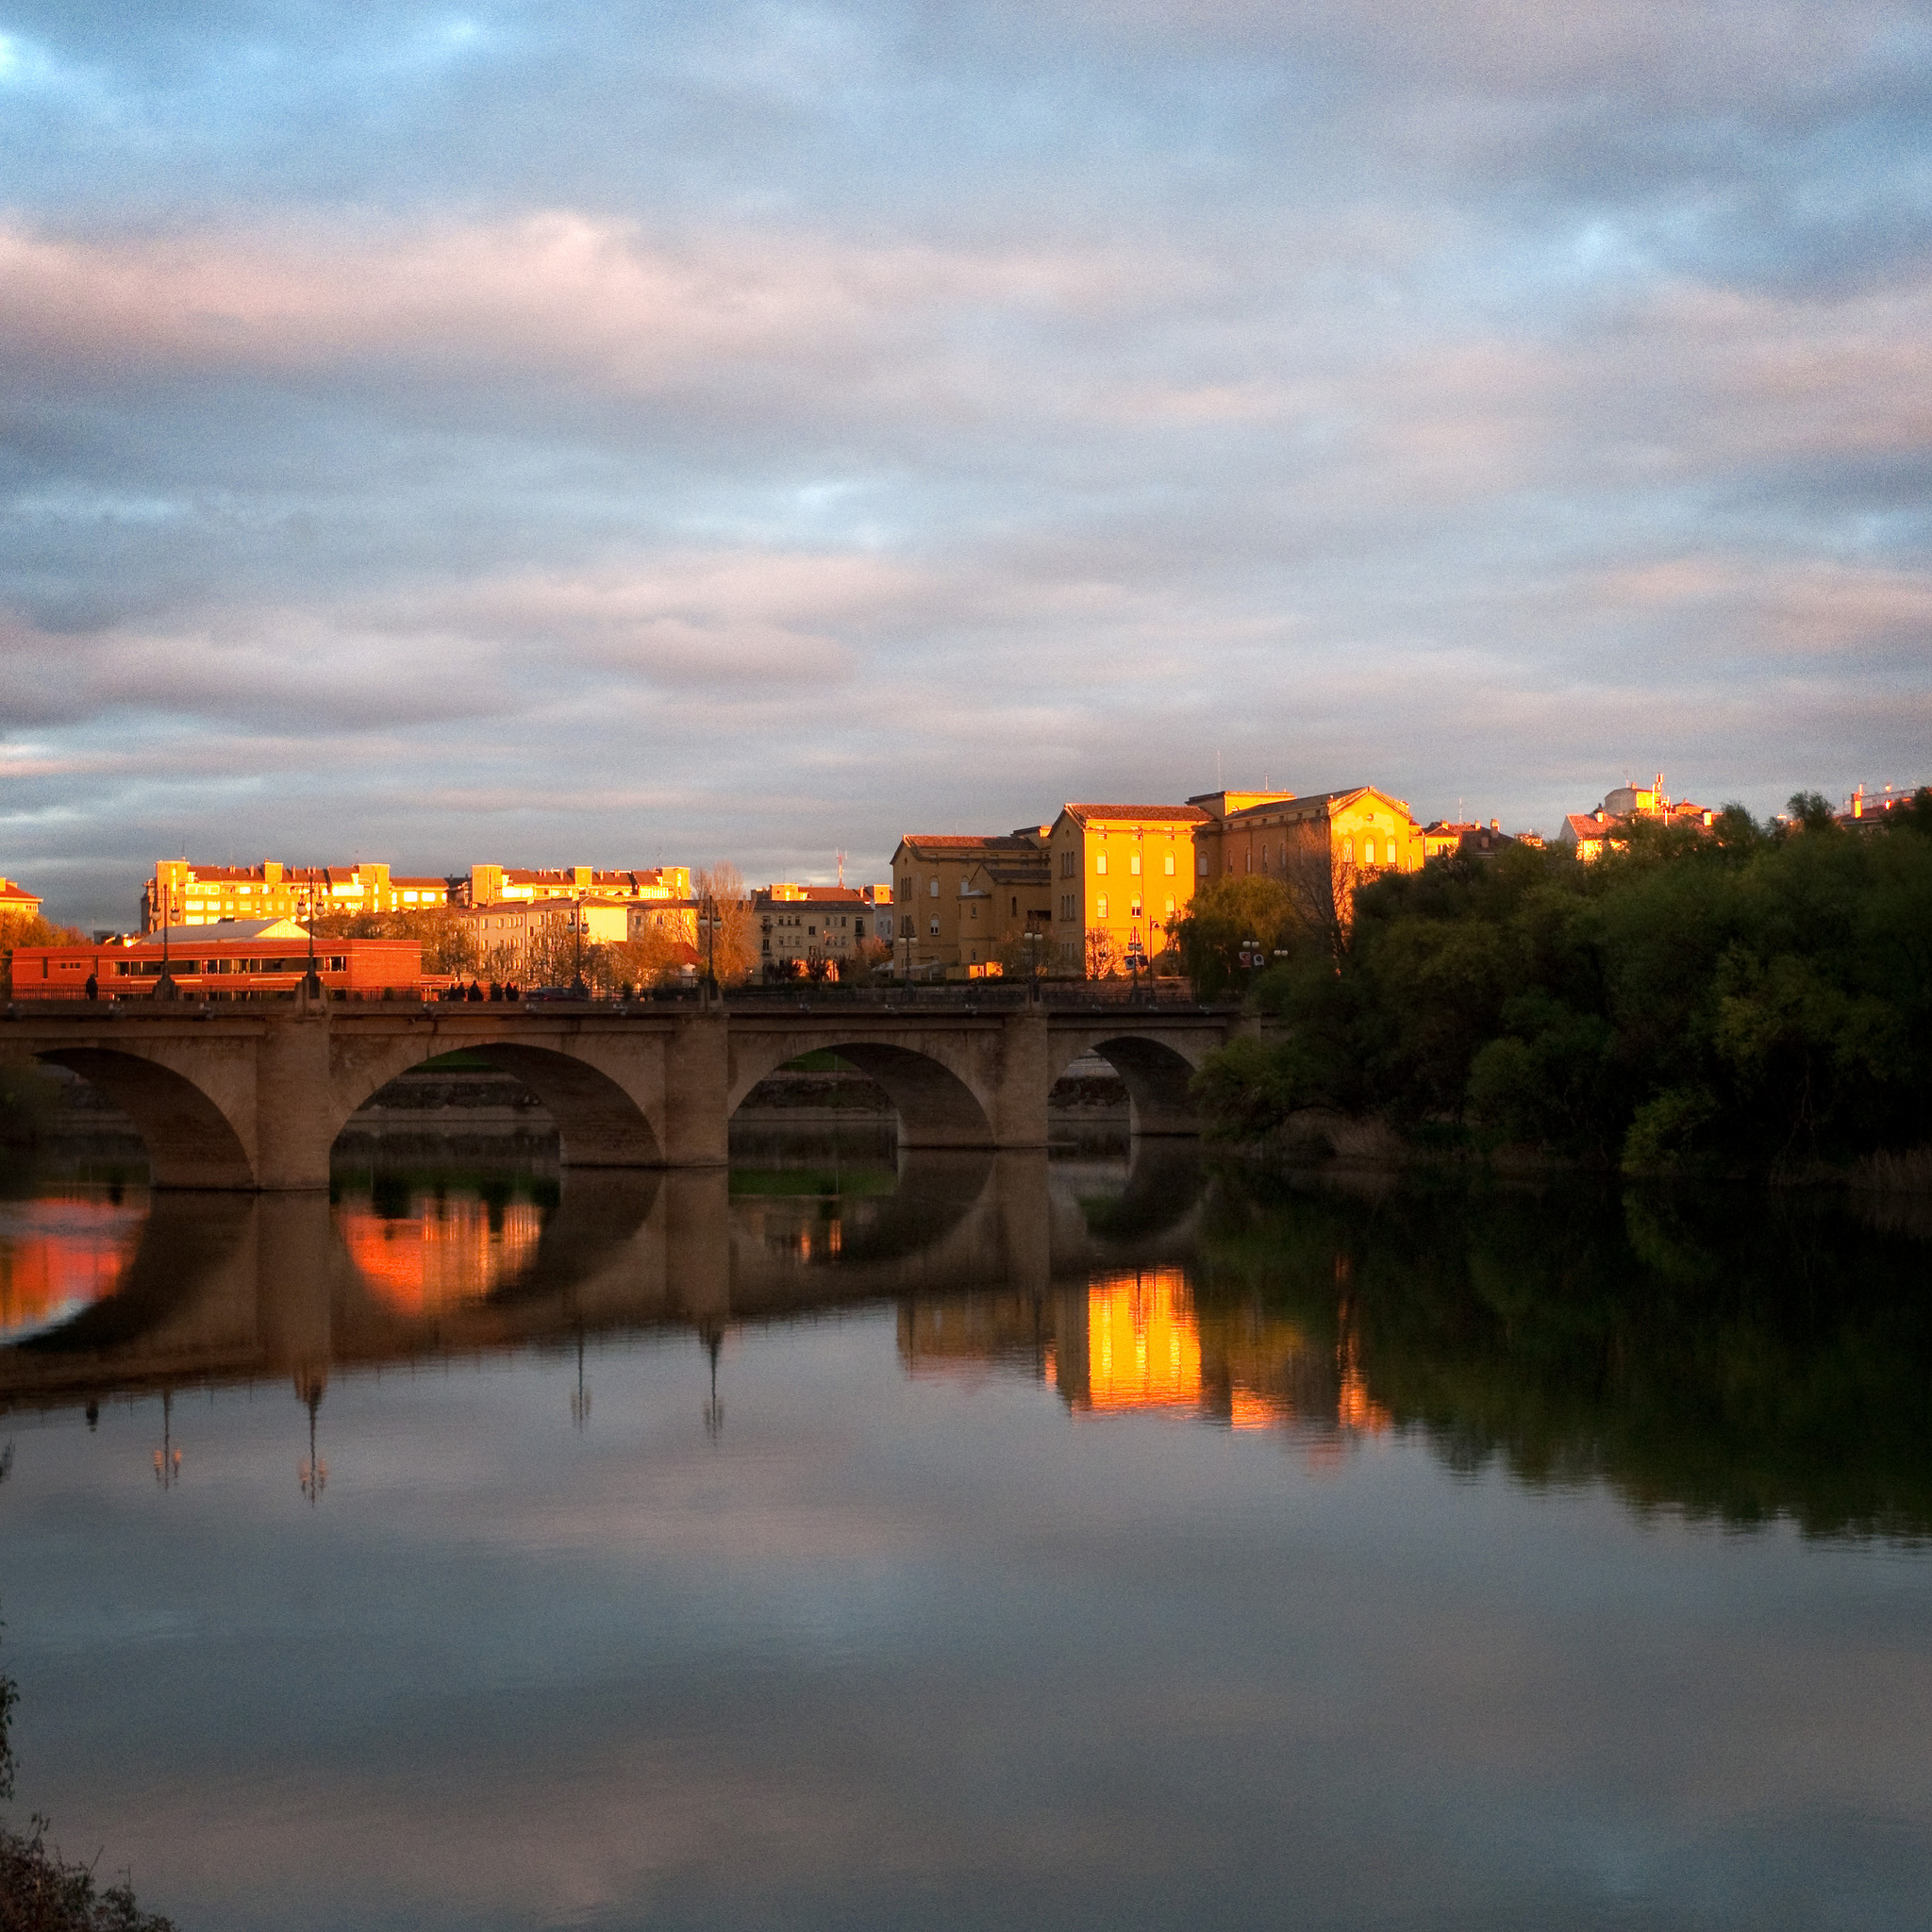 Logroño stone bridge over a river and during the sunset